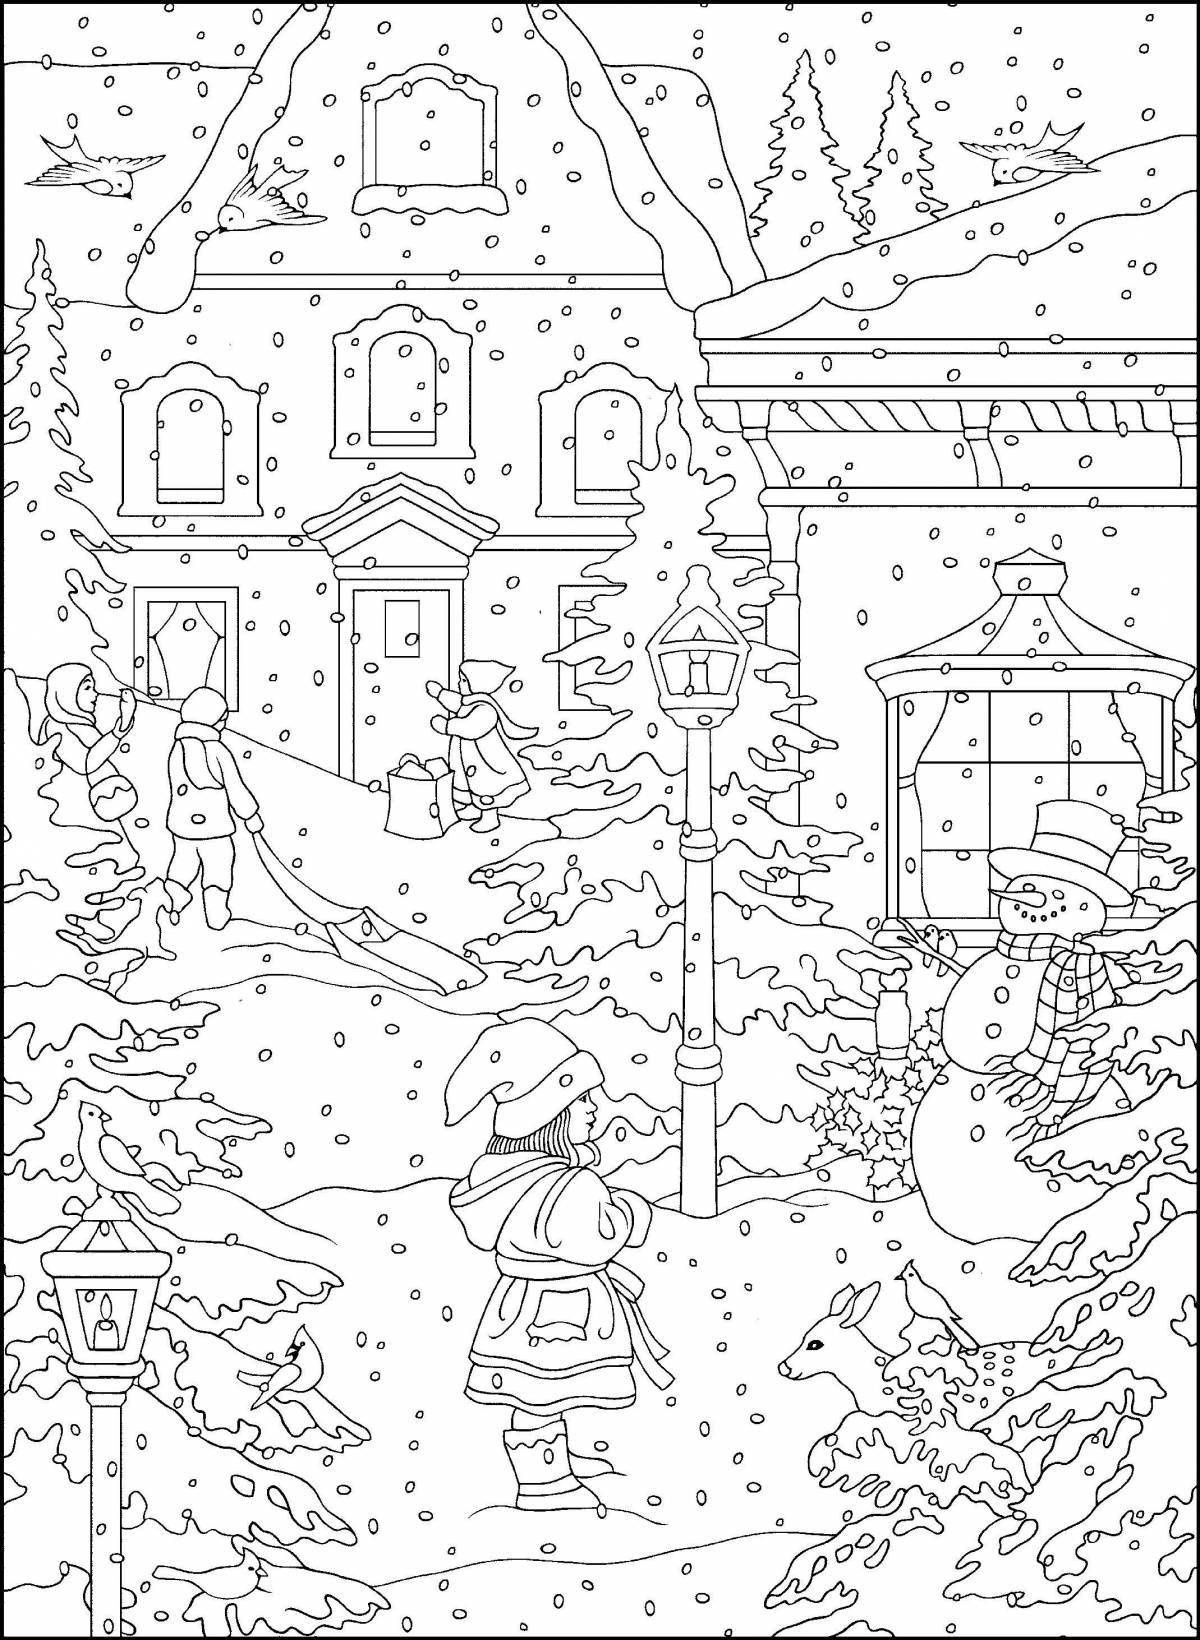 Coloring page charming winter in the forest